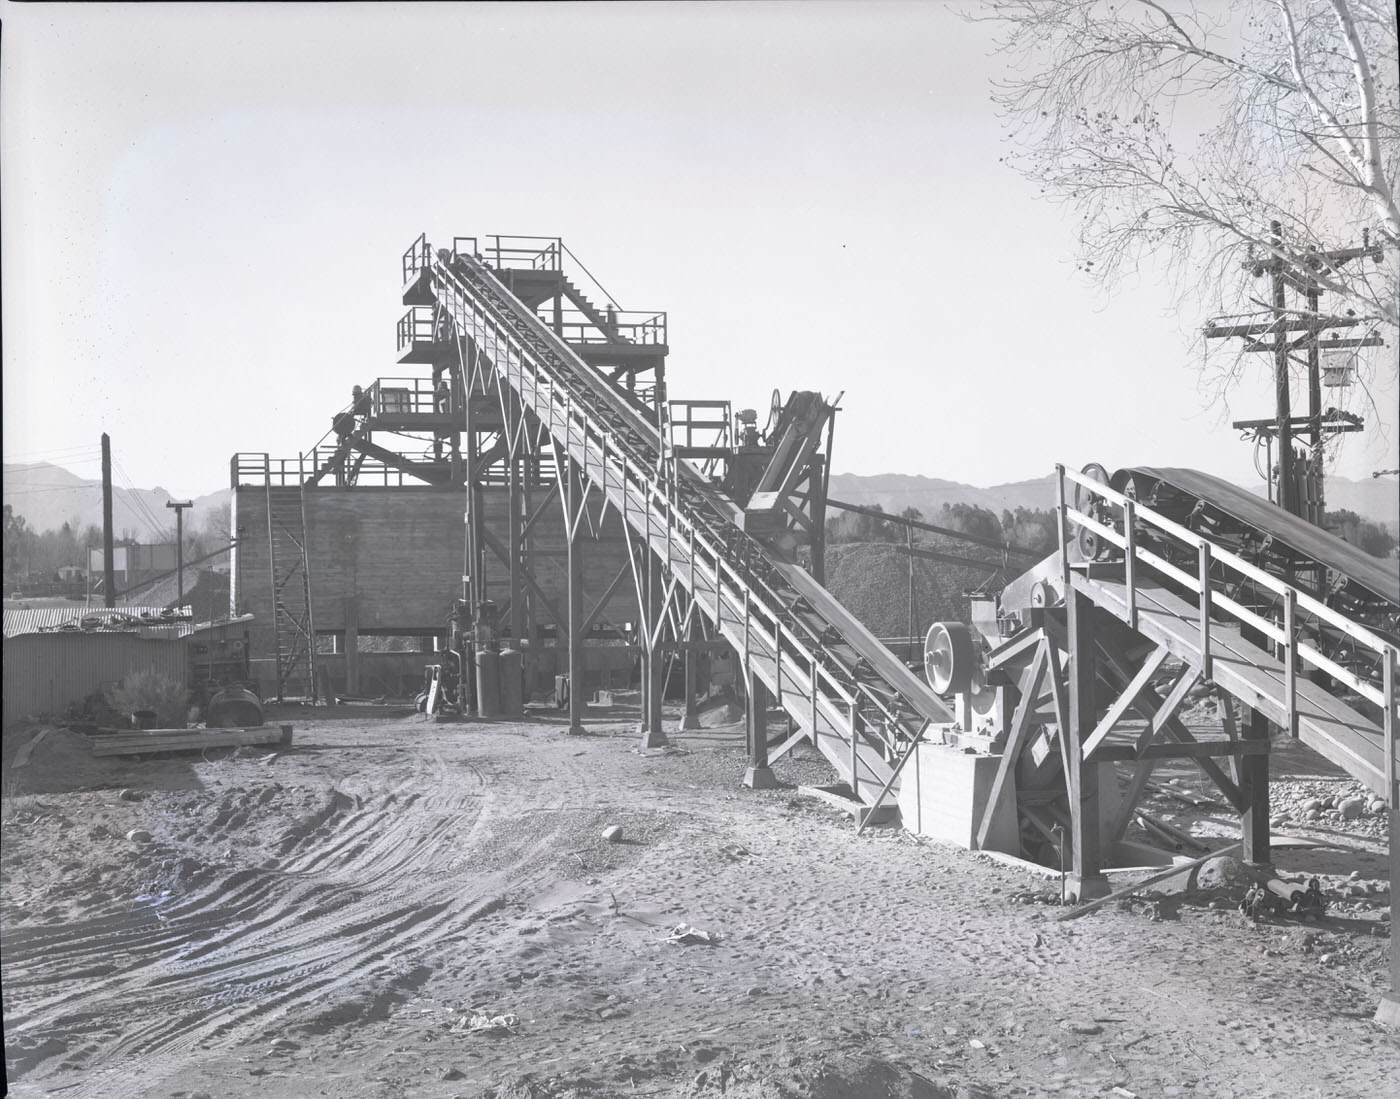 Union Rock & Material Co. Equipment, 1946